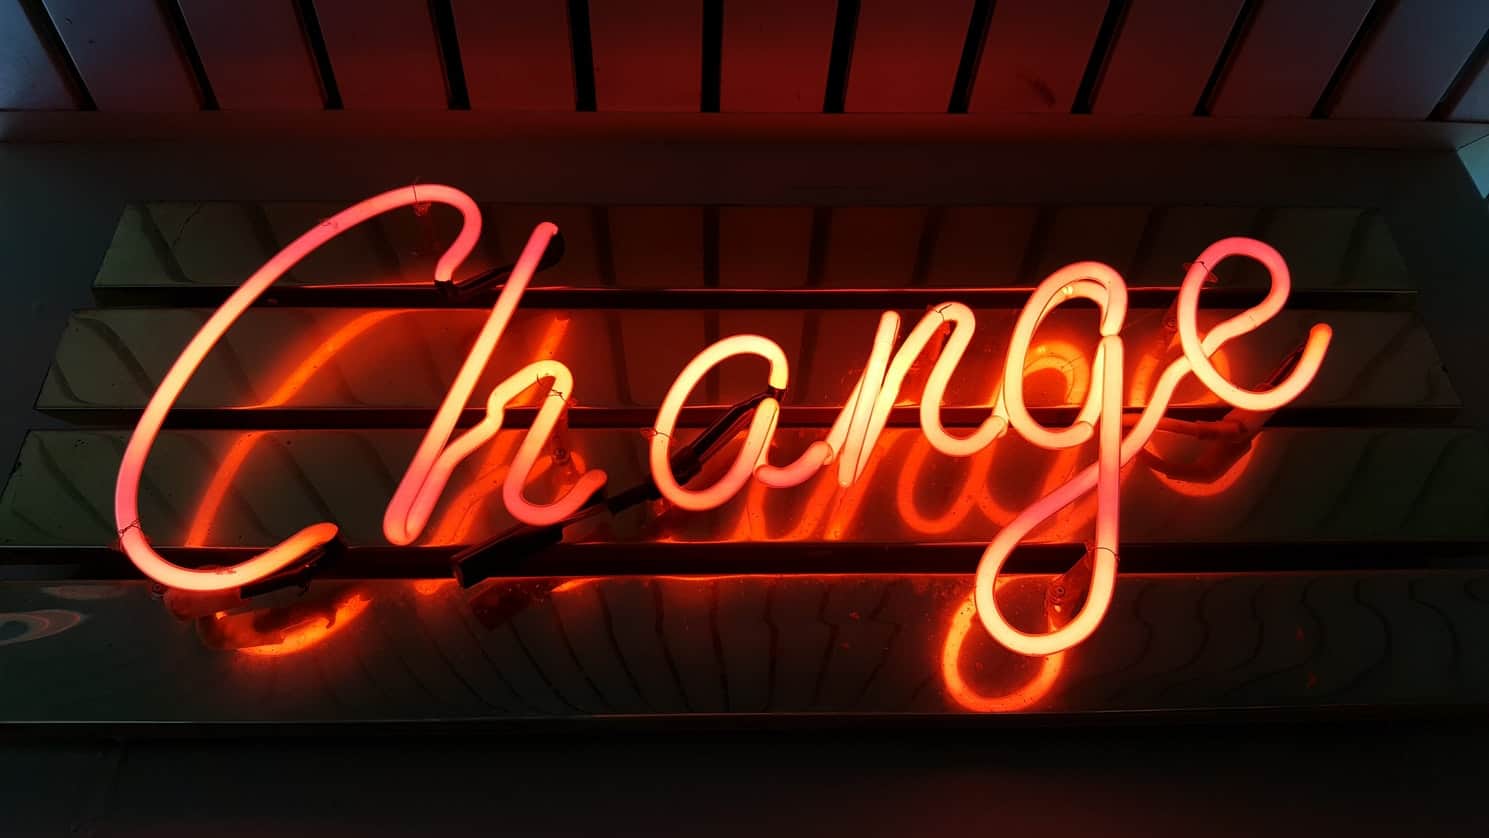 Neon sign says change. All goals are changeable.